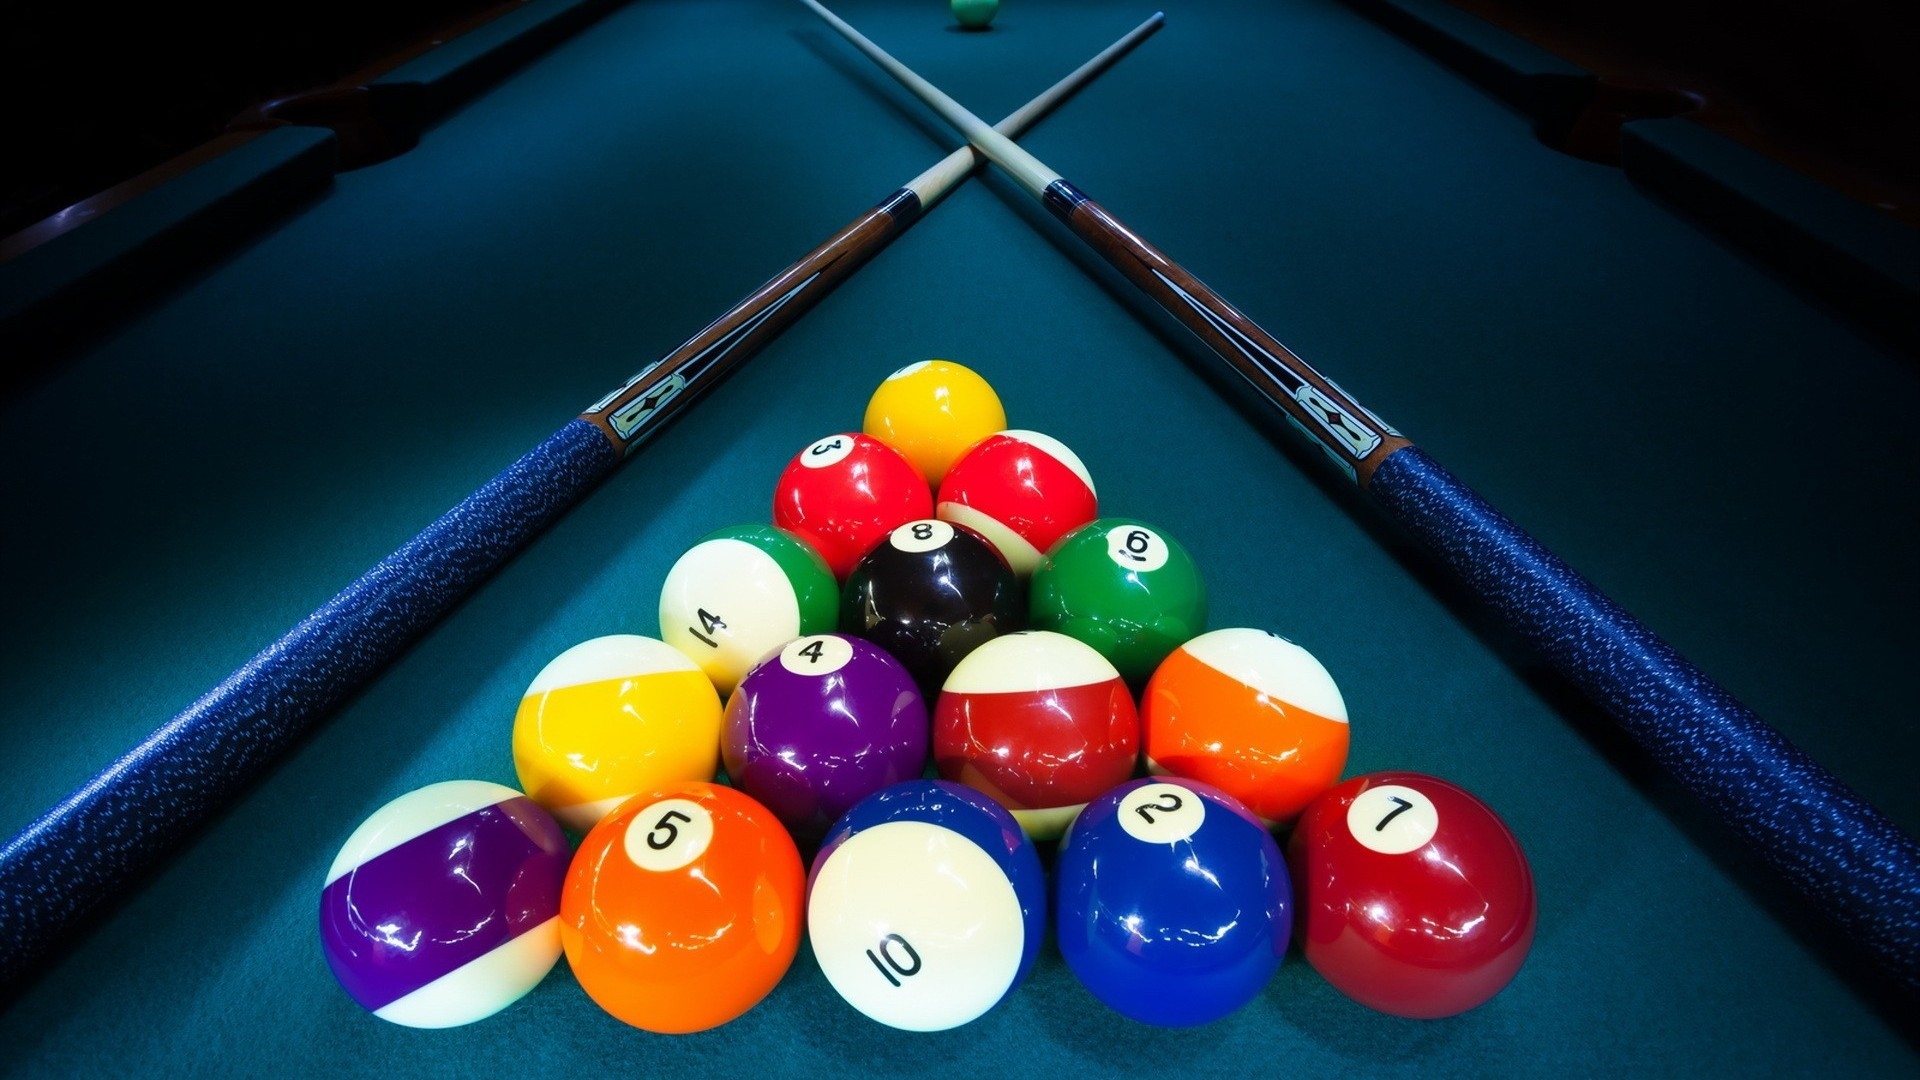 Billiards Game Table for 1920 x 1080 HDTV 1080p resolution